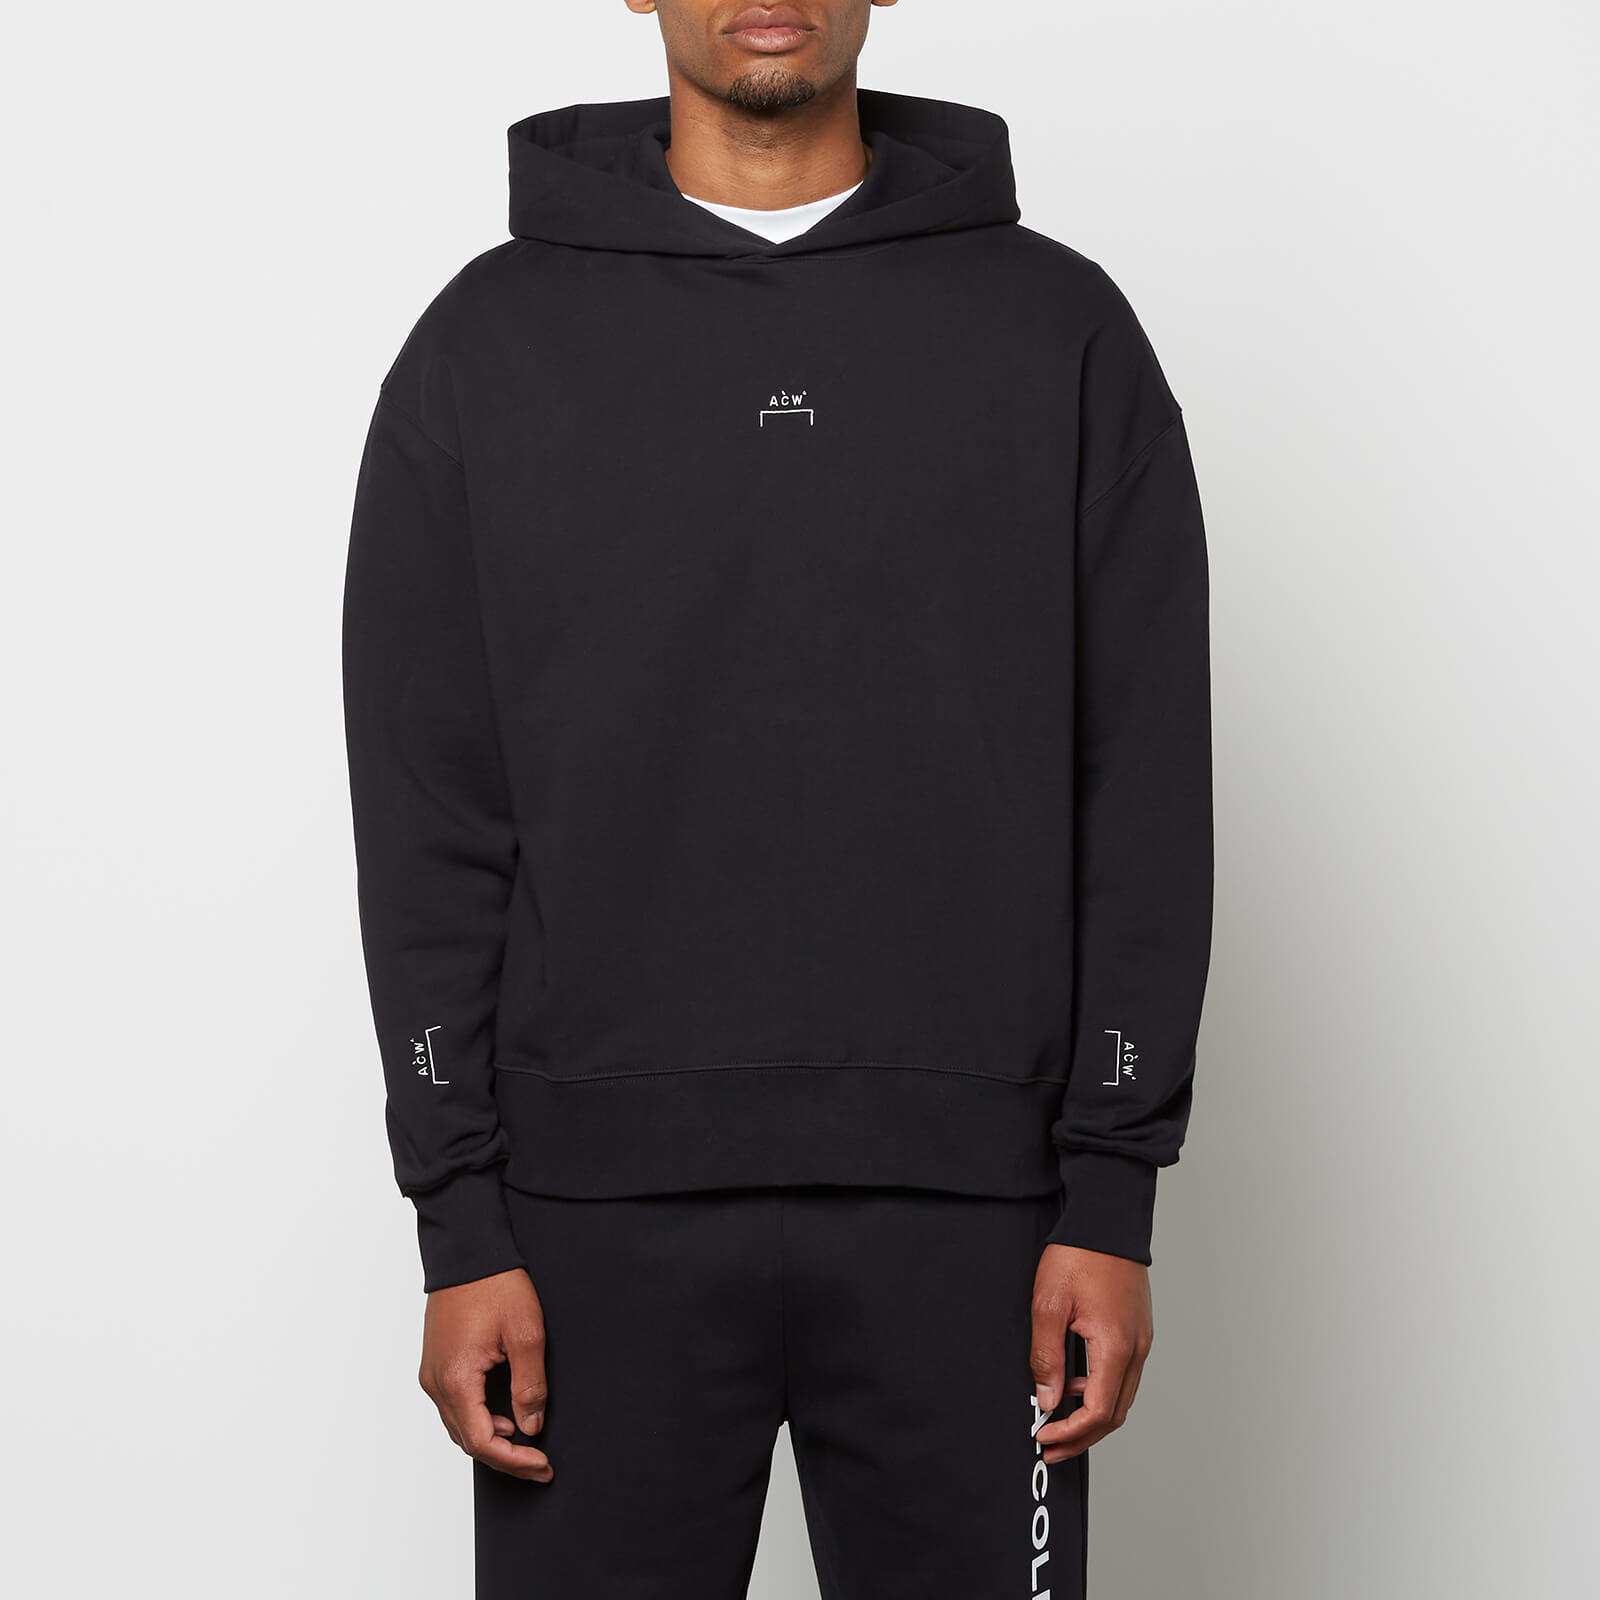 A-COLD-WALL* Men's Essential Hoodie - Black - S